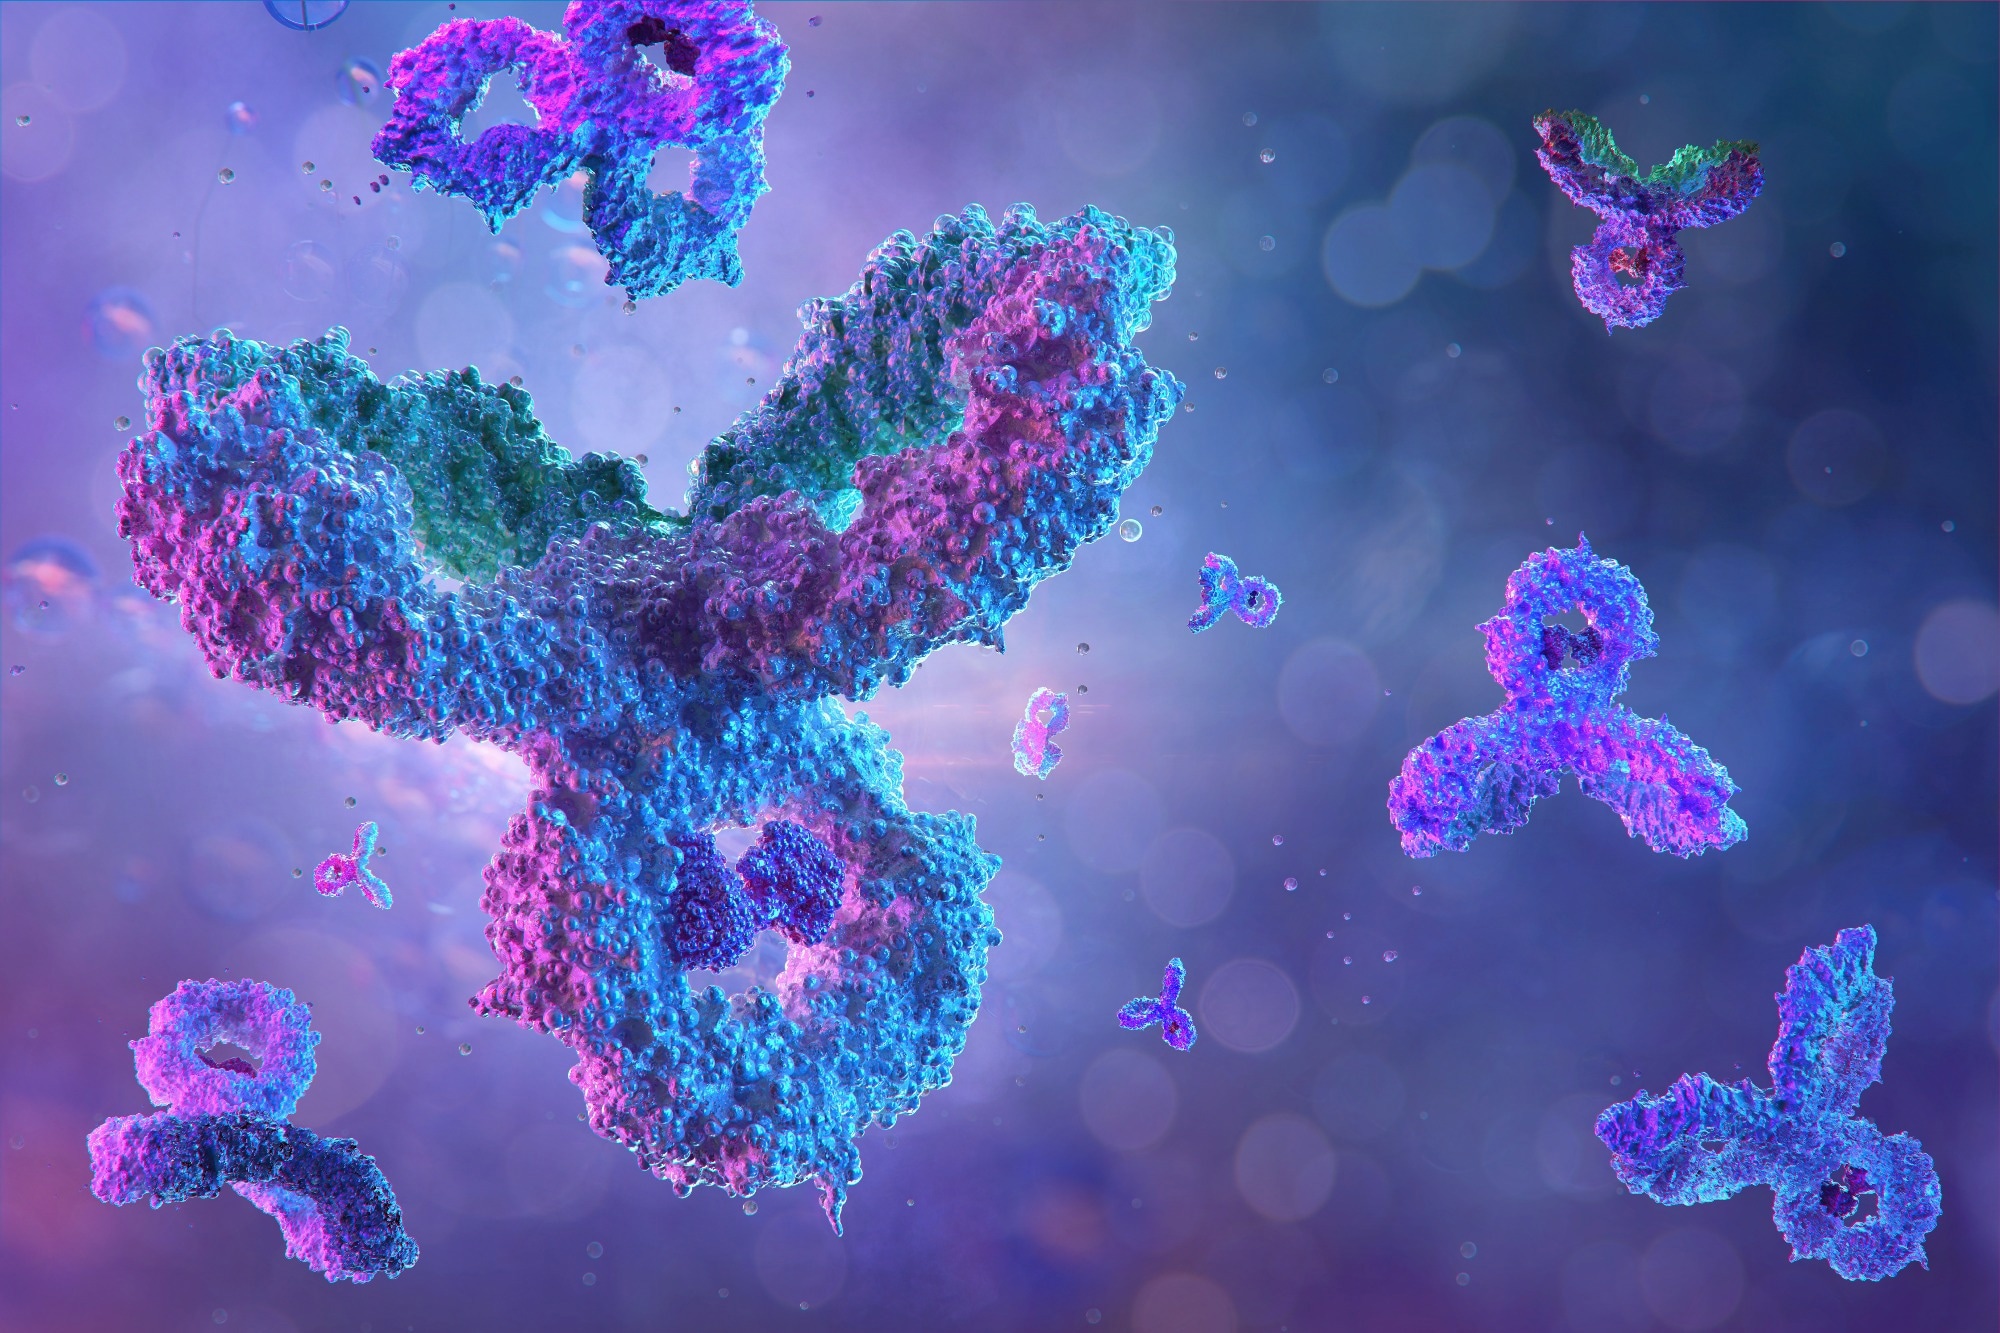 Study: A multi-specific, multi-affinity antibody platform neutralizes sarbecoviruses and confers protection against SARS-CoV-2 in vivo. Image Credit: CoronaBorealisStudio/Shutterstock.com